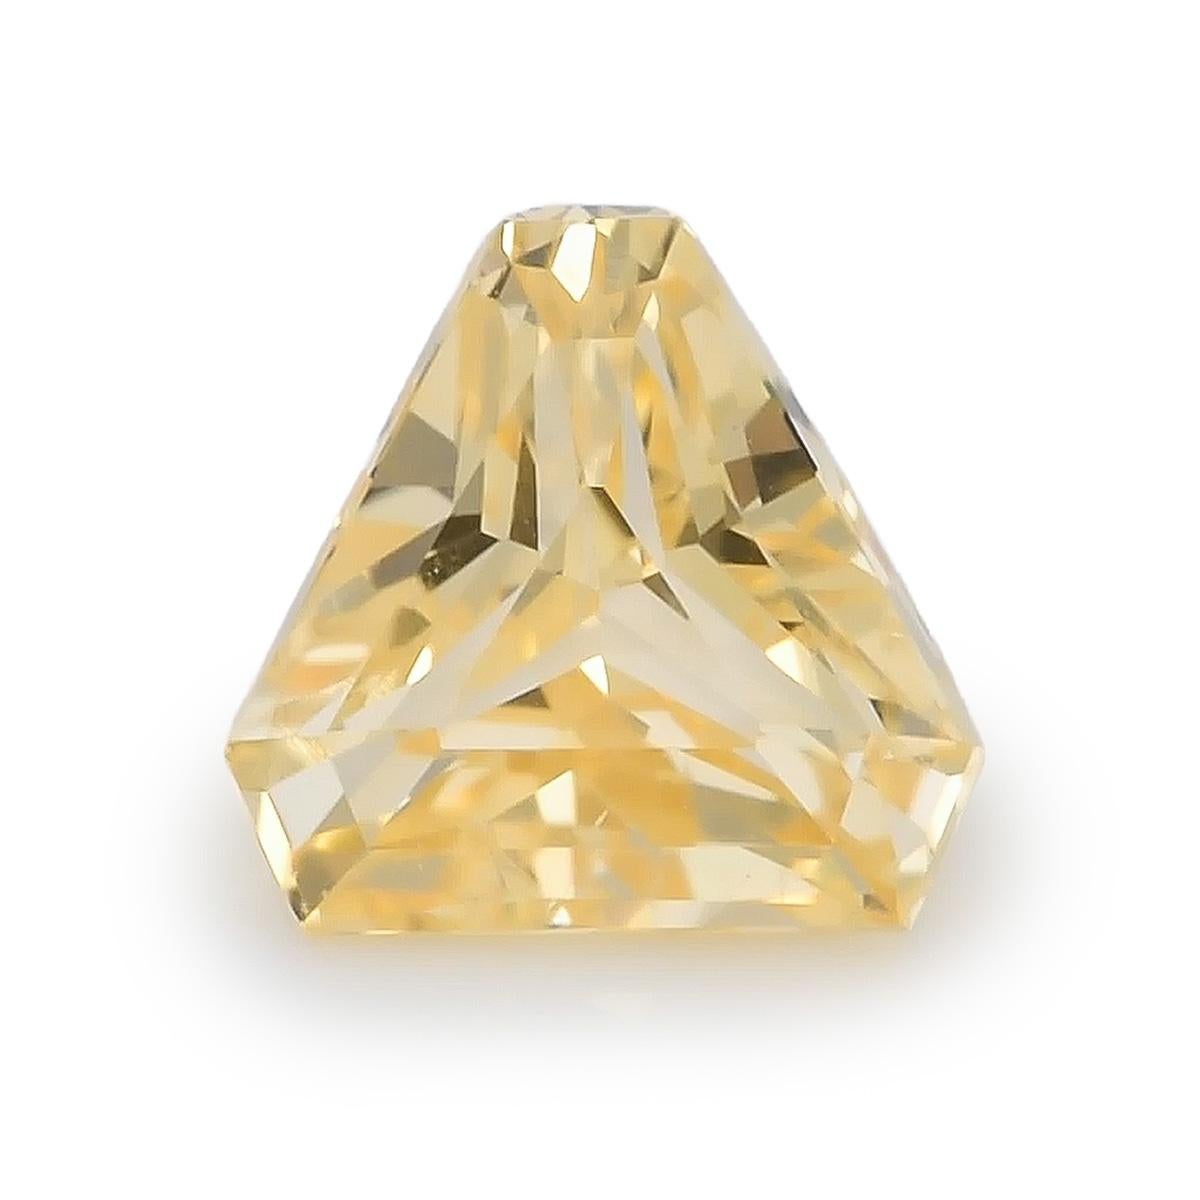 Brilliant Cut 2.12 Carat Natural Triangular Yellow Sapphire, Sapphire for Jewelry Making For Sale